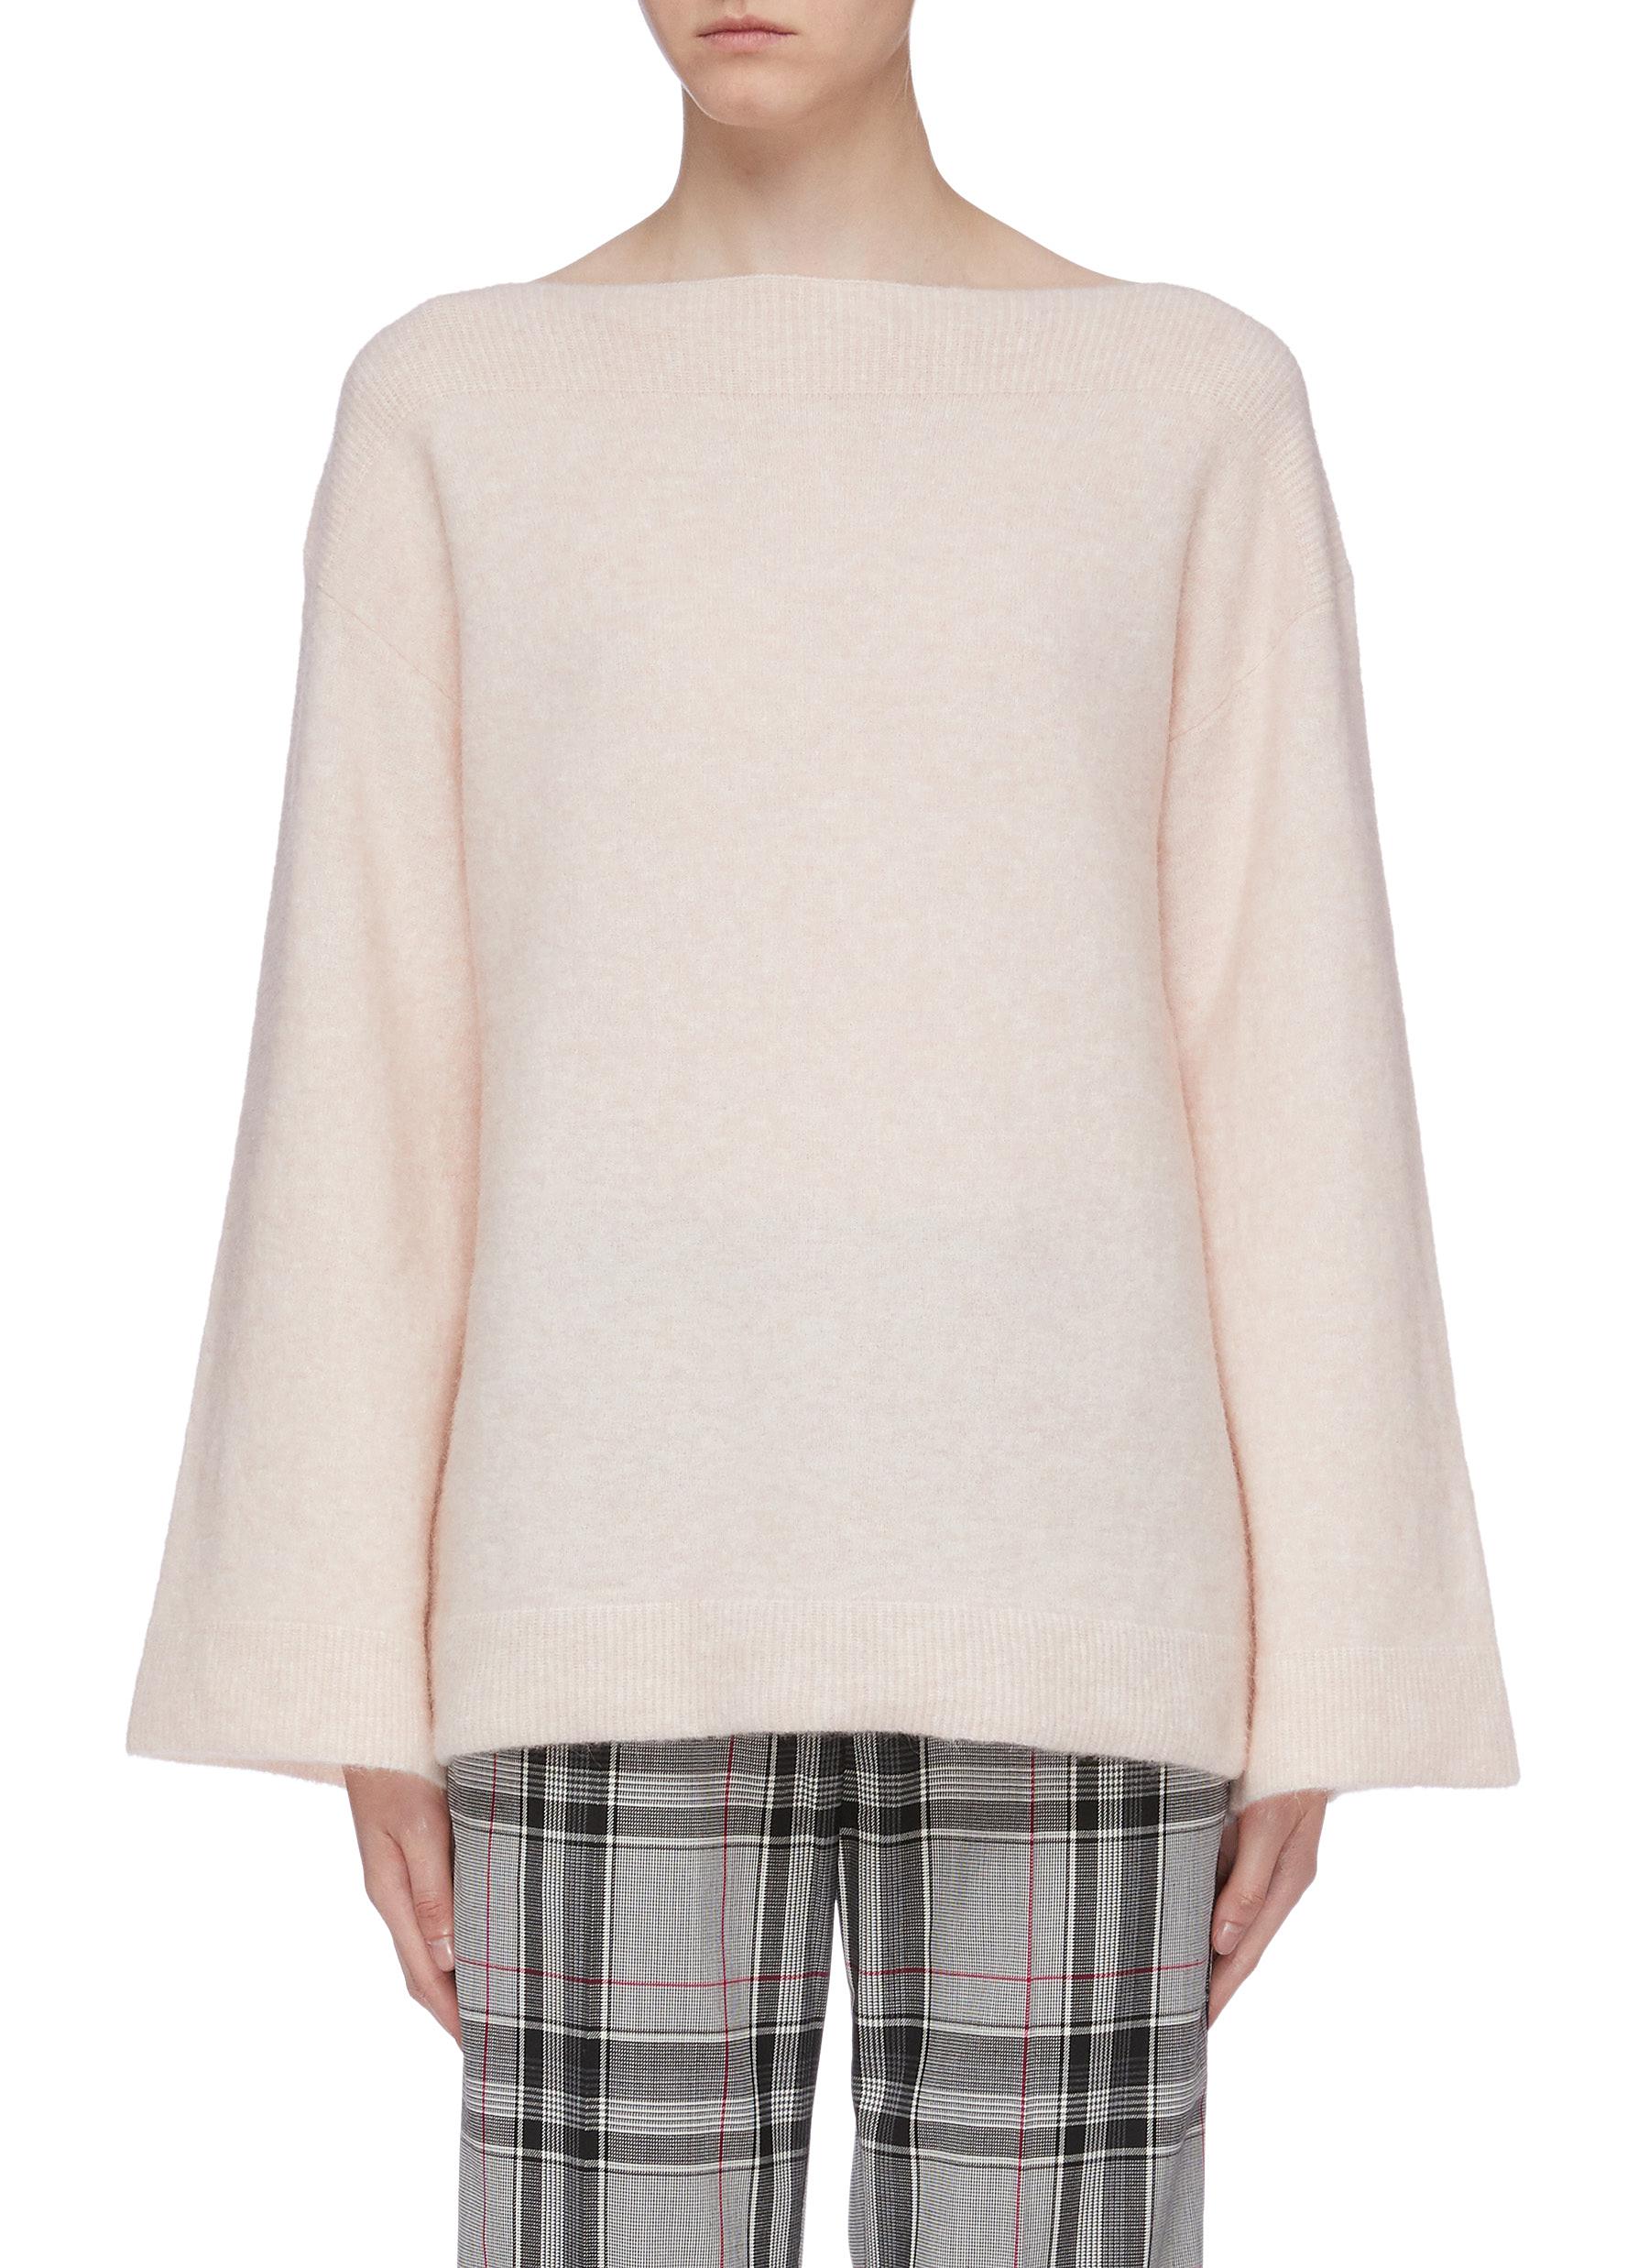 Bell sleeve boat neck sweater by 3.1 Phillip Lim